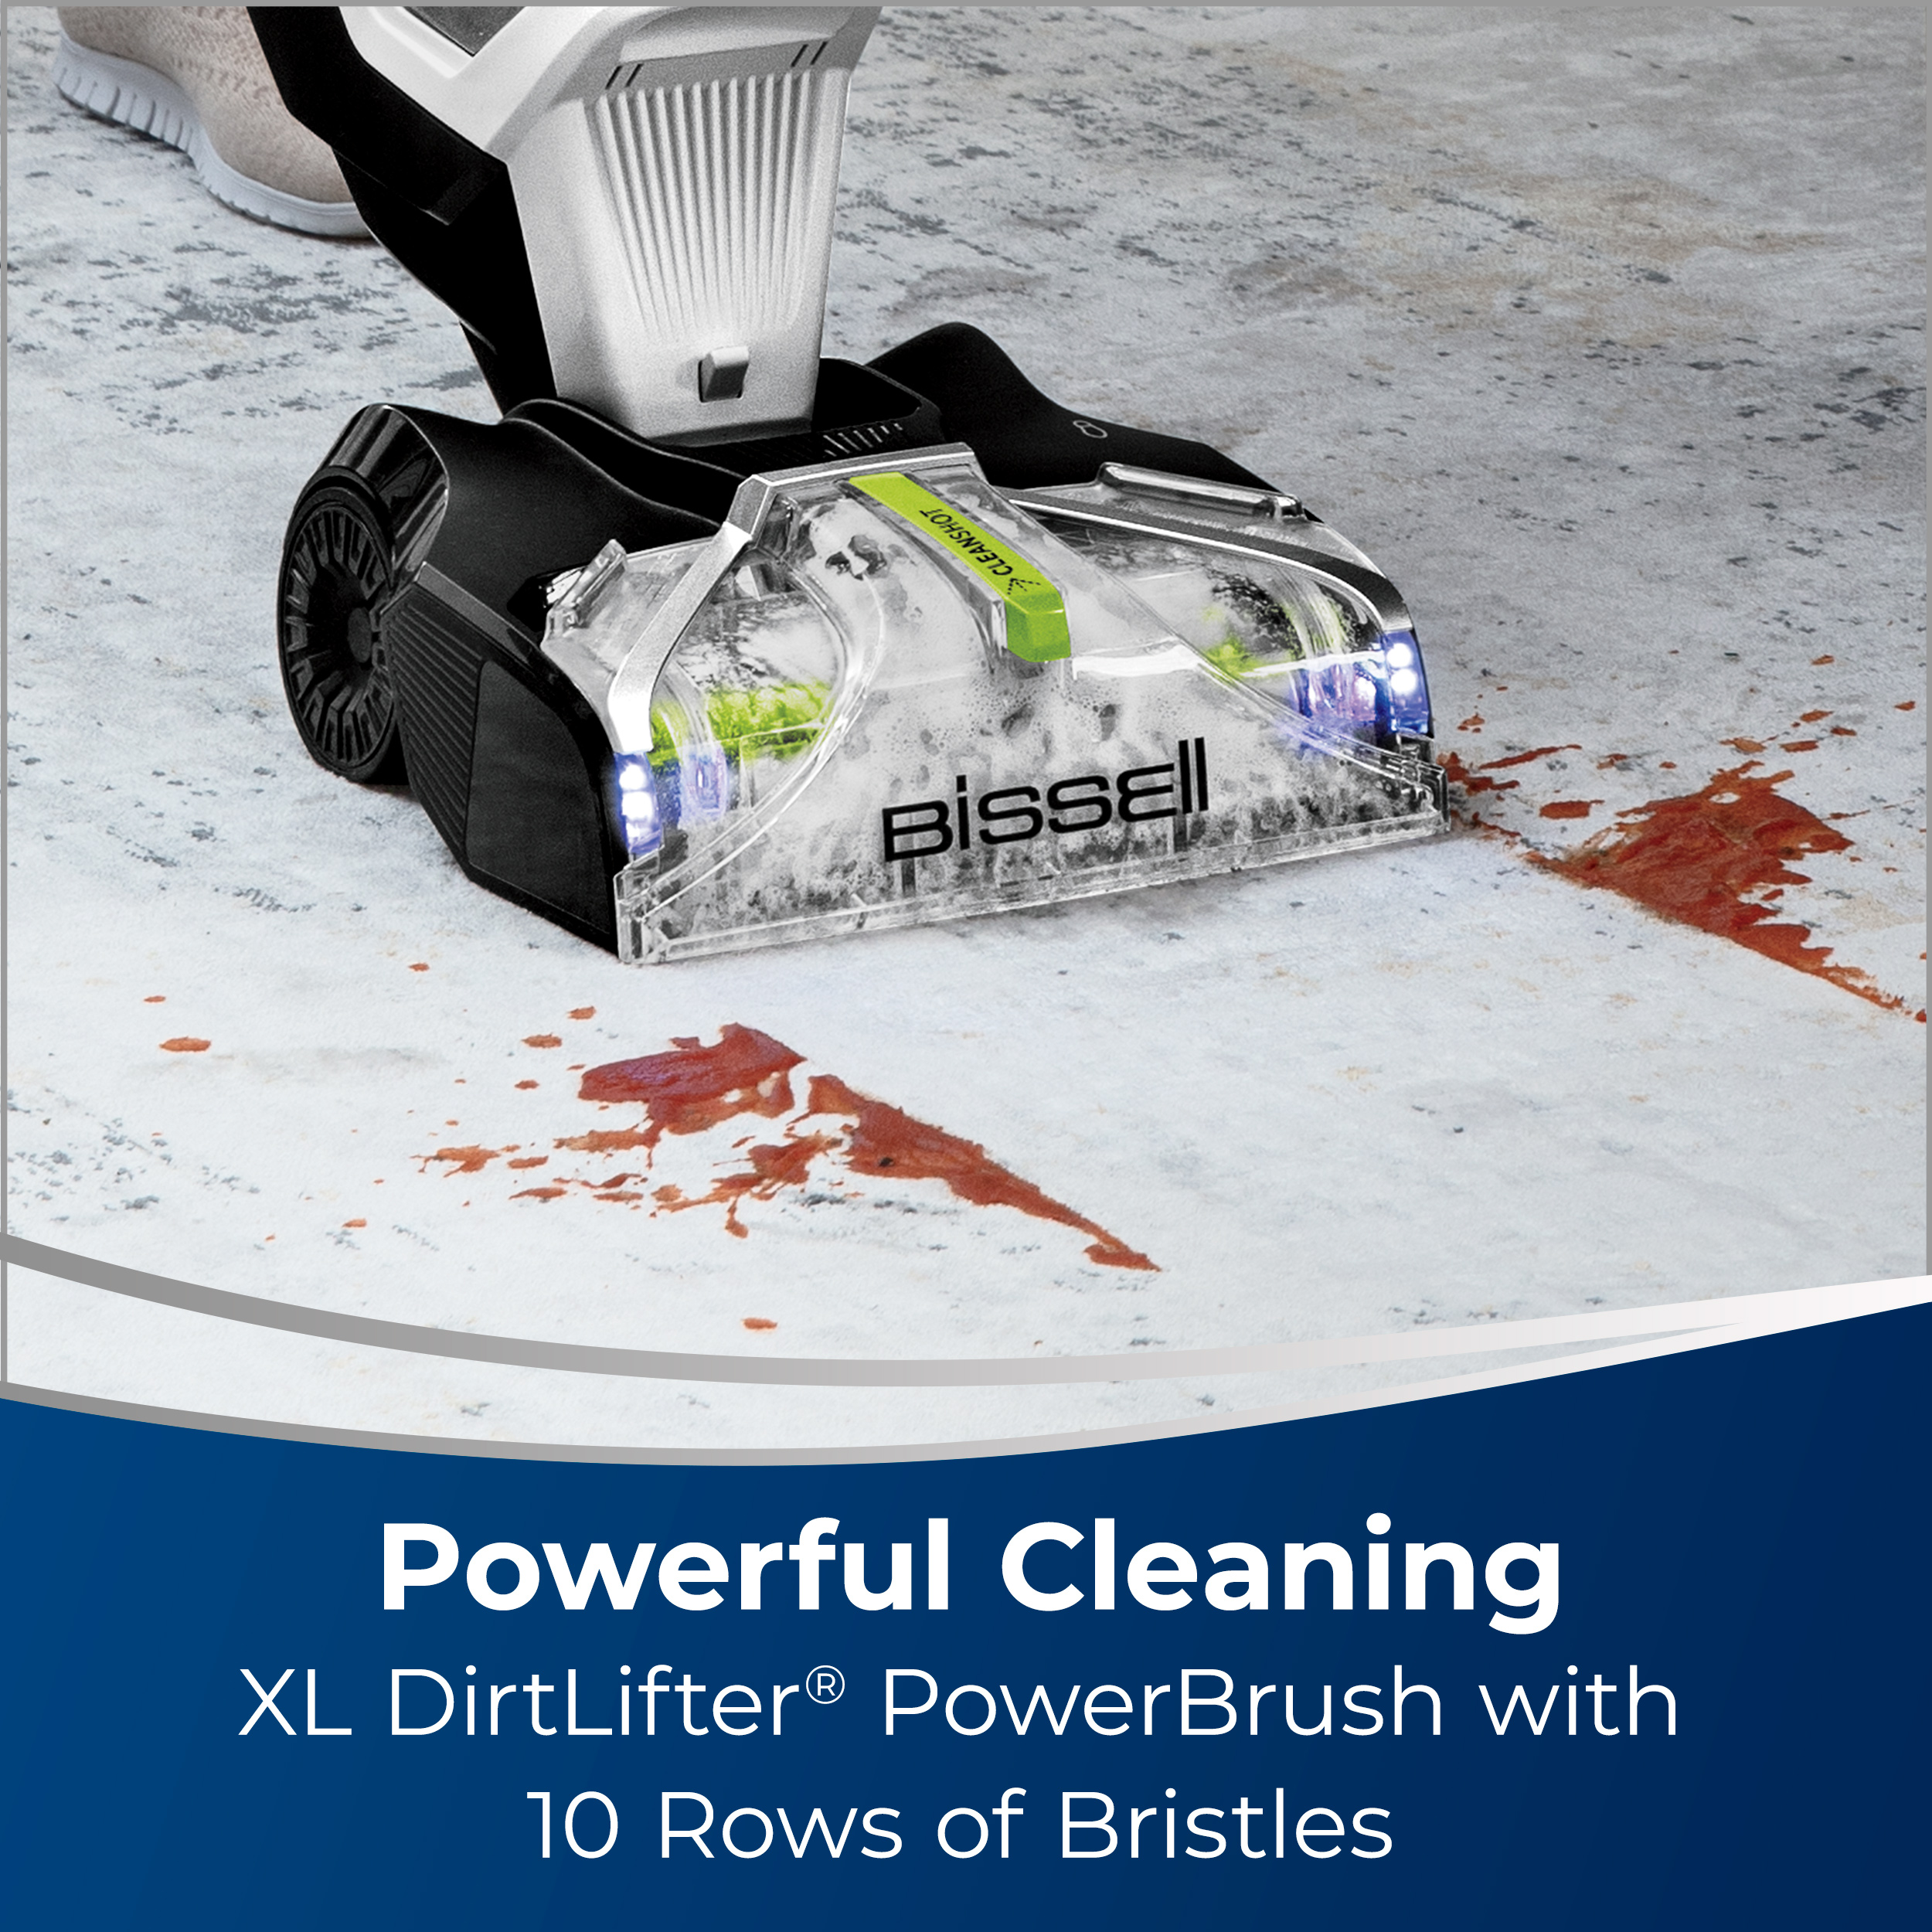 Bissell JetScrub Upright Carpet Washer and Spot and Stain Remover -  2526 - image 4 of 8